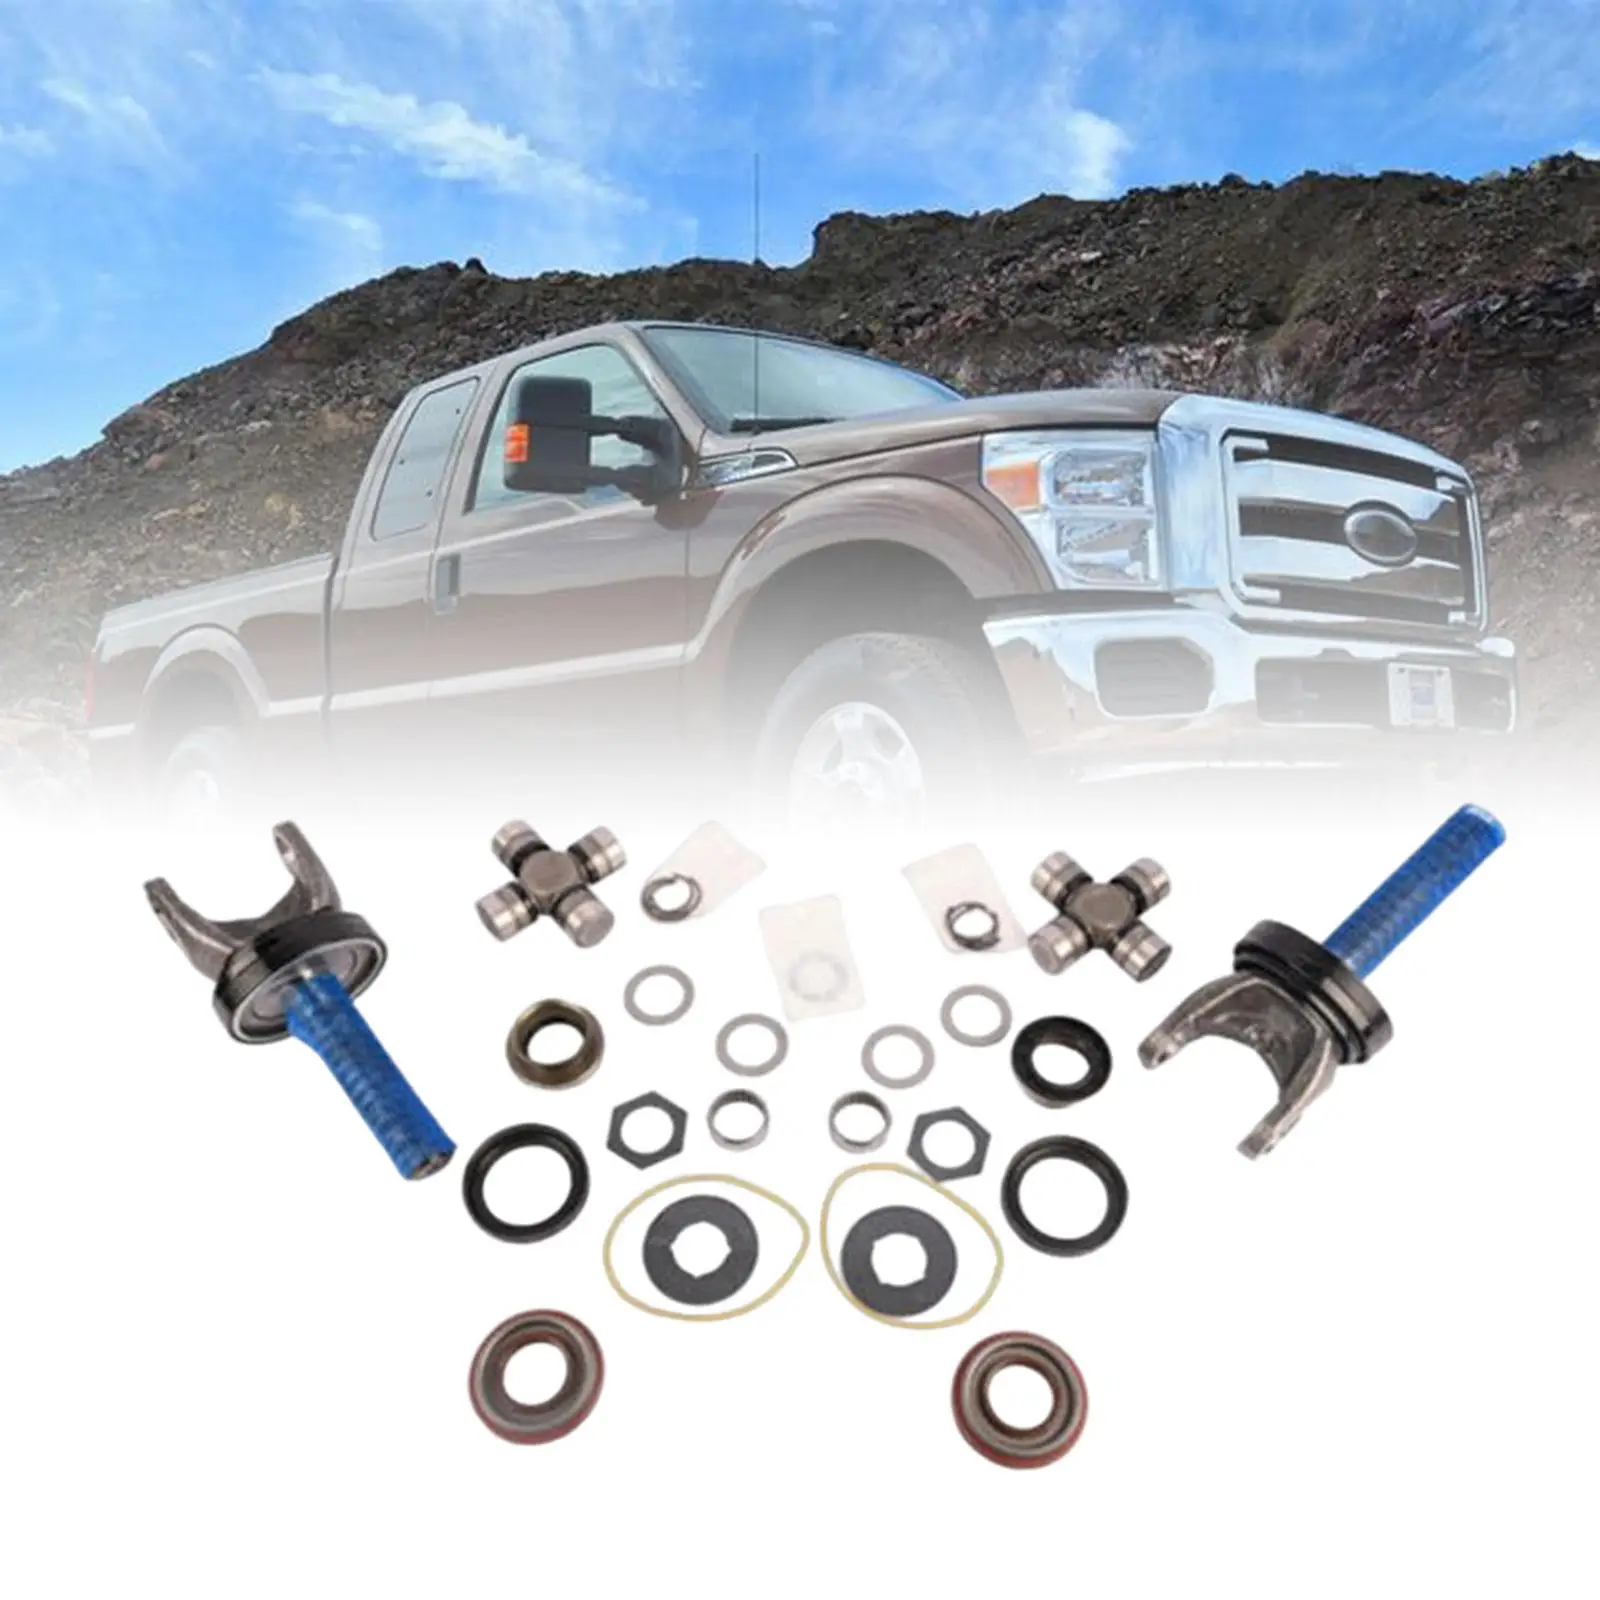 Front Axle Shaft Seal and Bearing Kit 700238-2x 50491 for Ford Super Duty F250 F350 1998-2004 Directly Replace High Quality